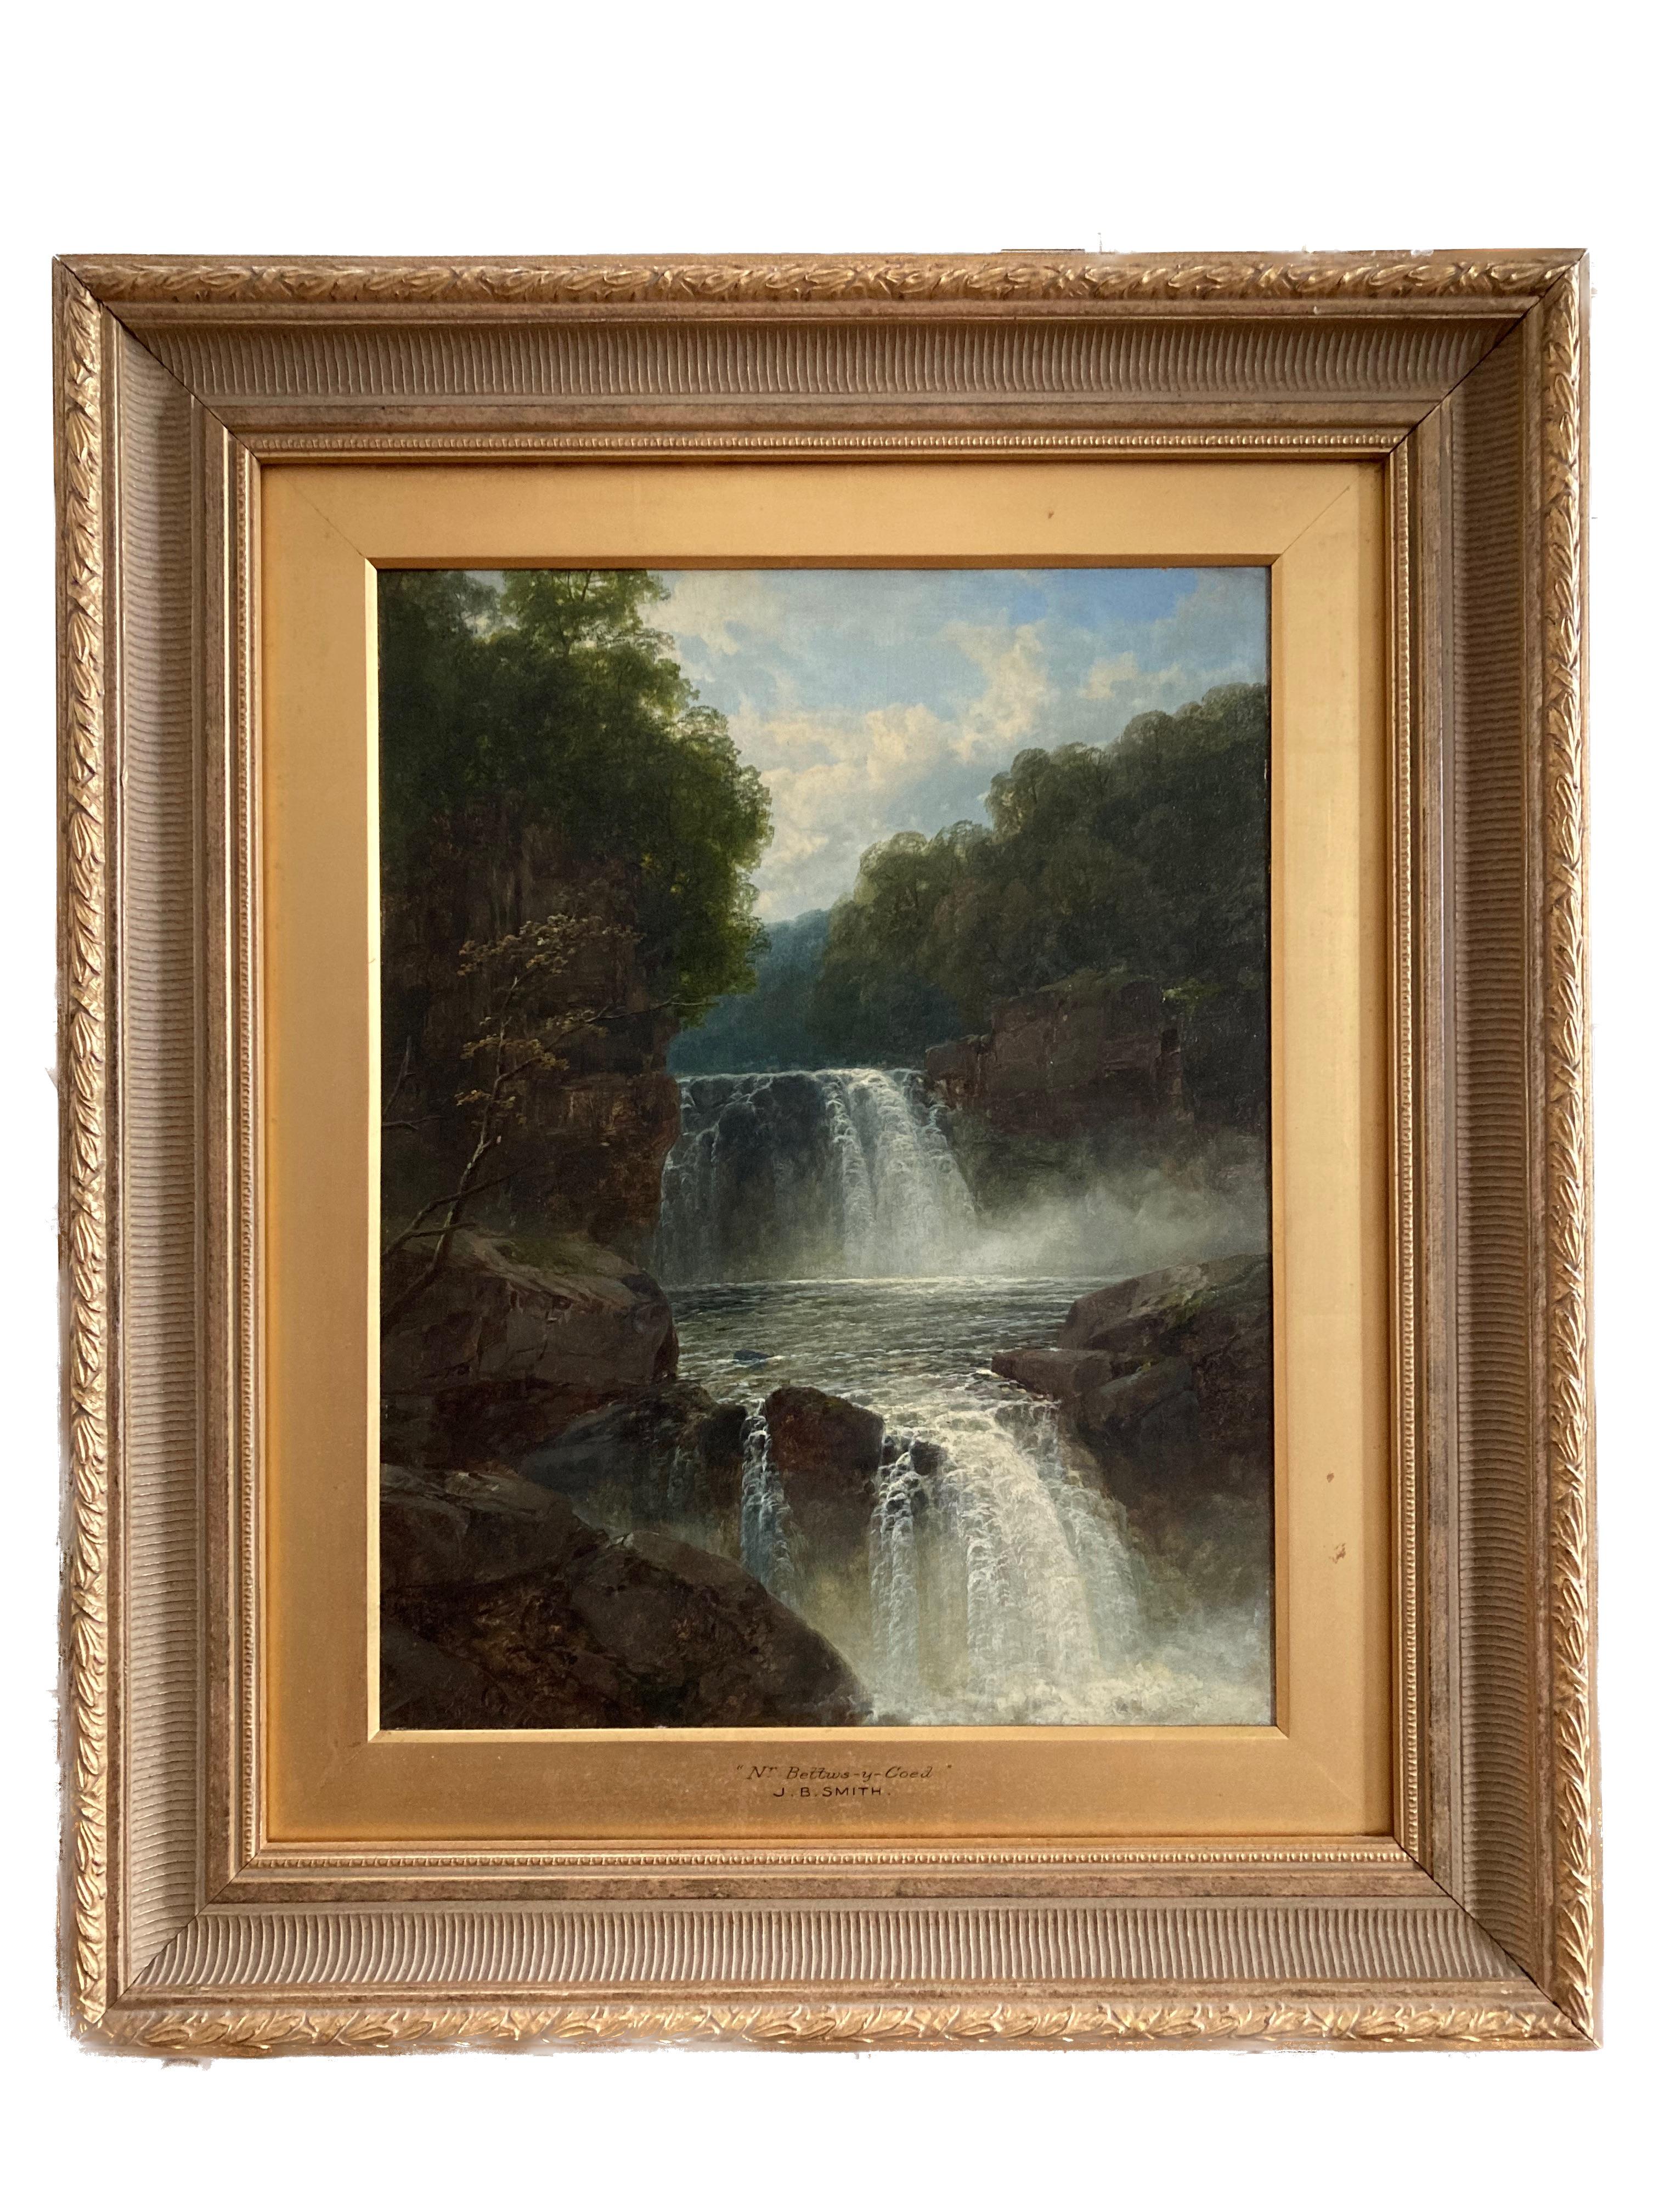 John Brandon Smith, Victorian view of Betwys-y-Coed waterfall, Wales